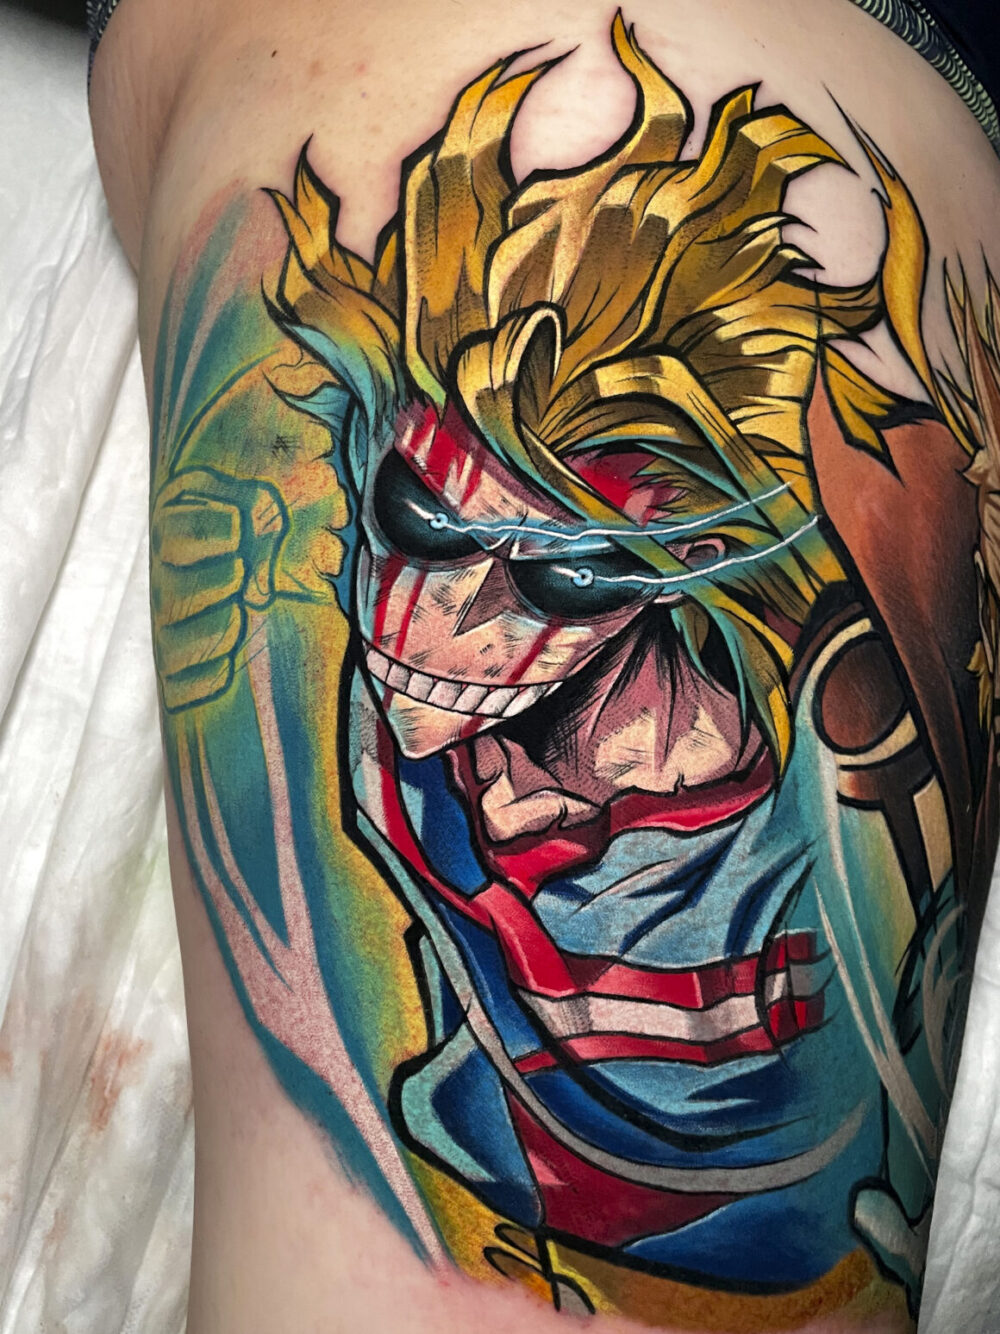 When it comes to anime or Manga Tattoos in Colorado Tashy is blowing  people away  The Rooster